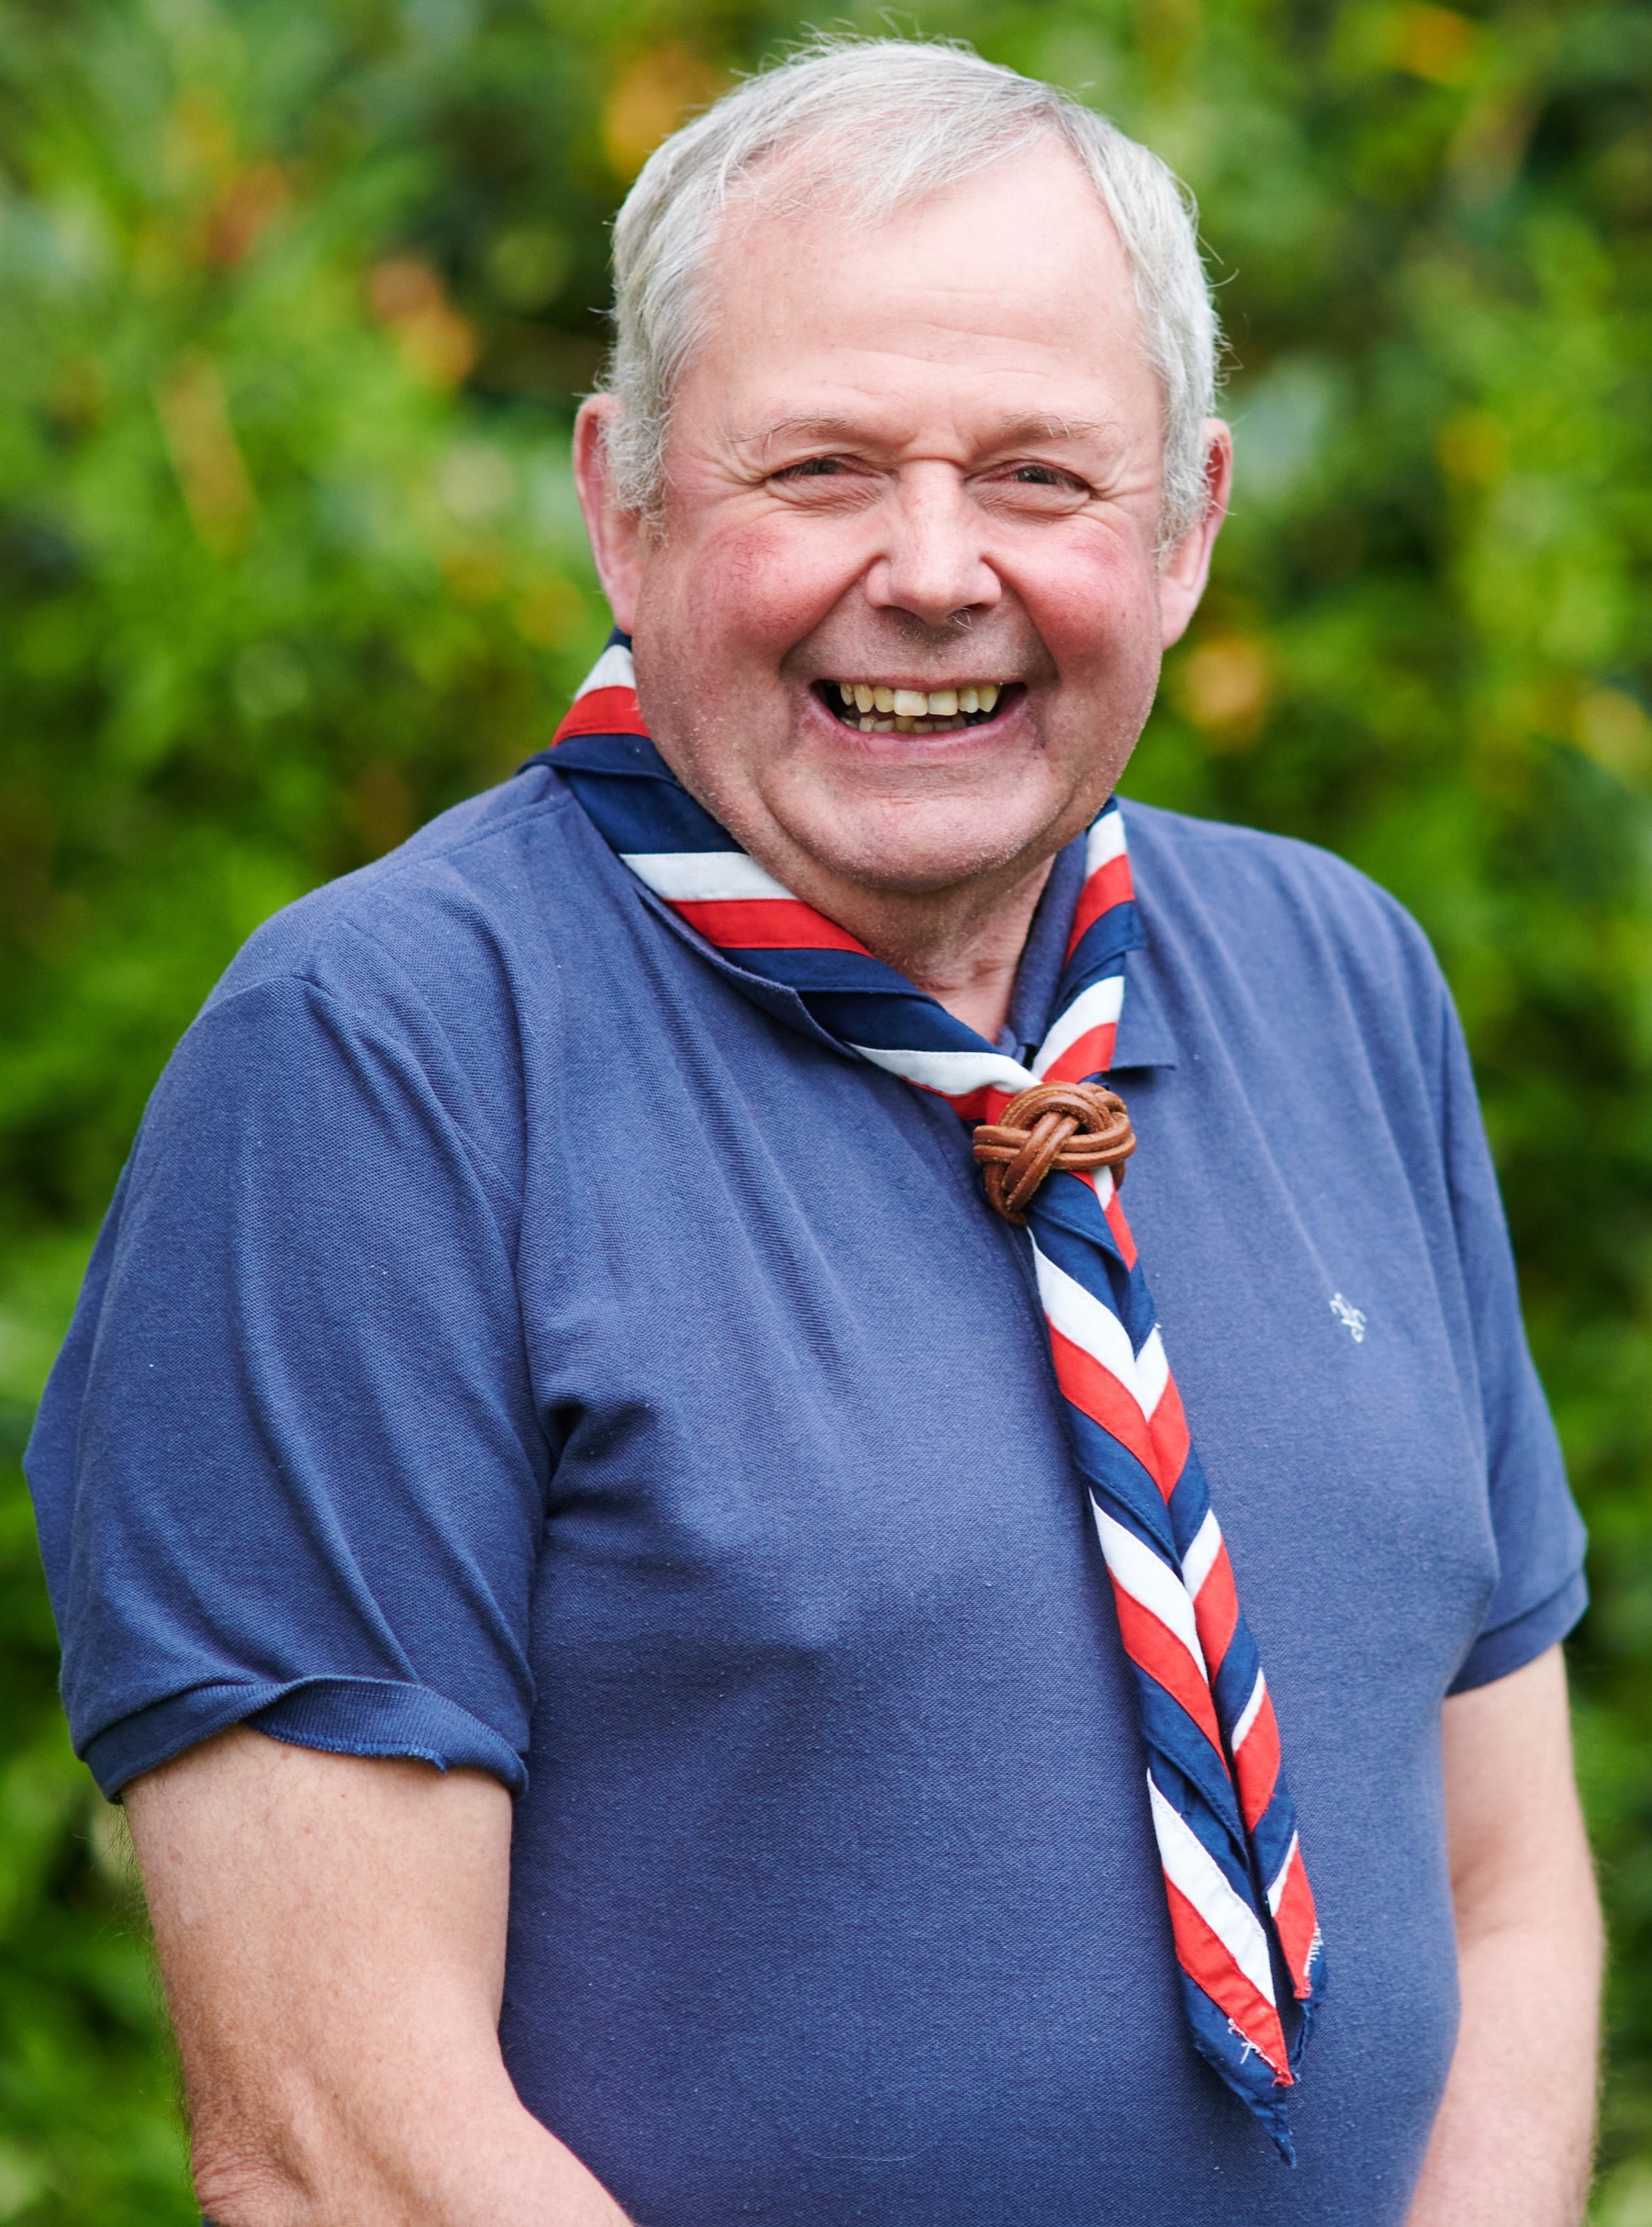 Stephen Donaldson smiling at the camera while wearing a navy Scouts polo shirt and stripy scarf